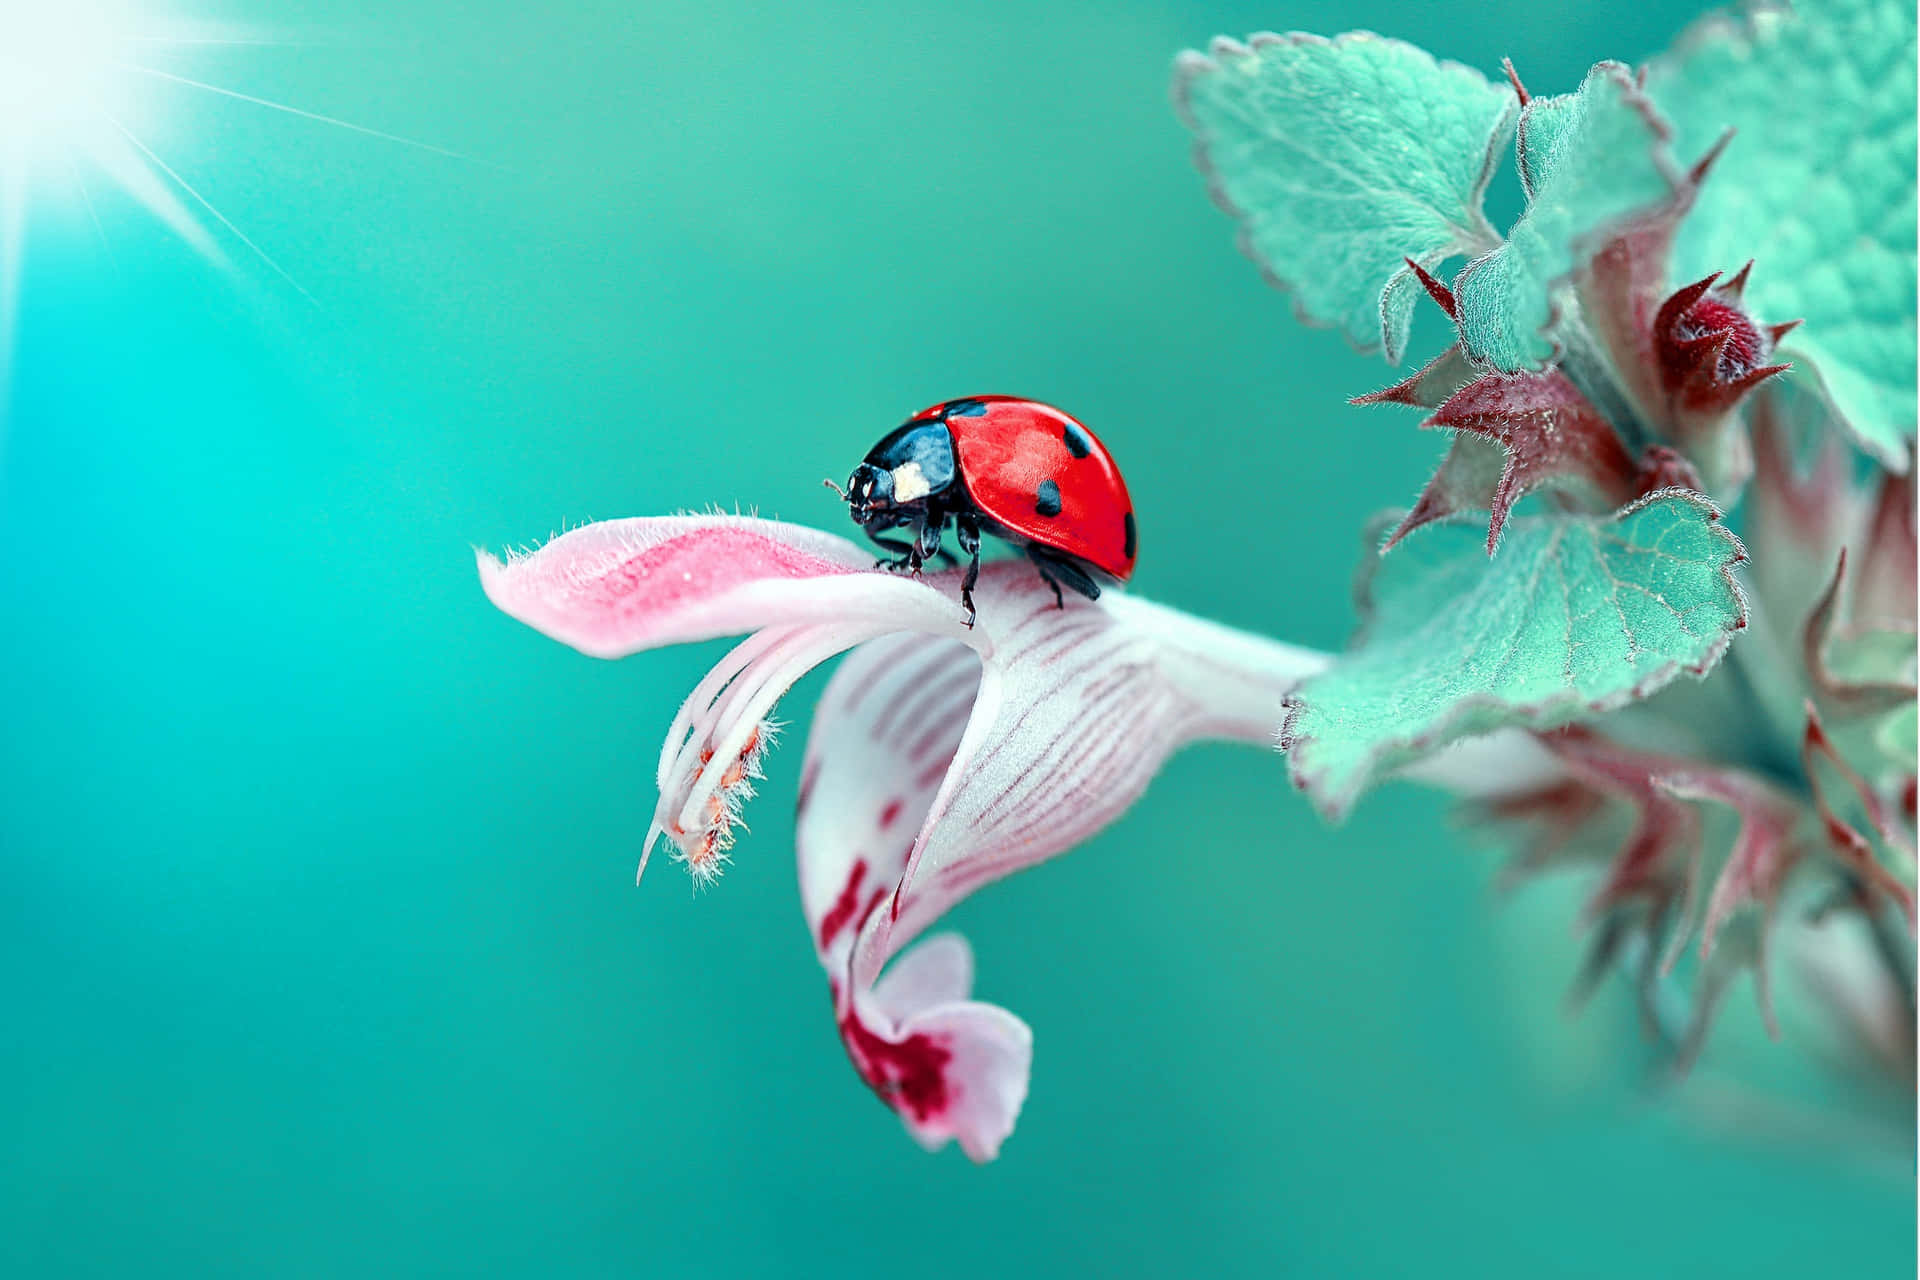 Ladybug Magnificent Life Of Insects Wallpaper